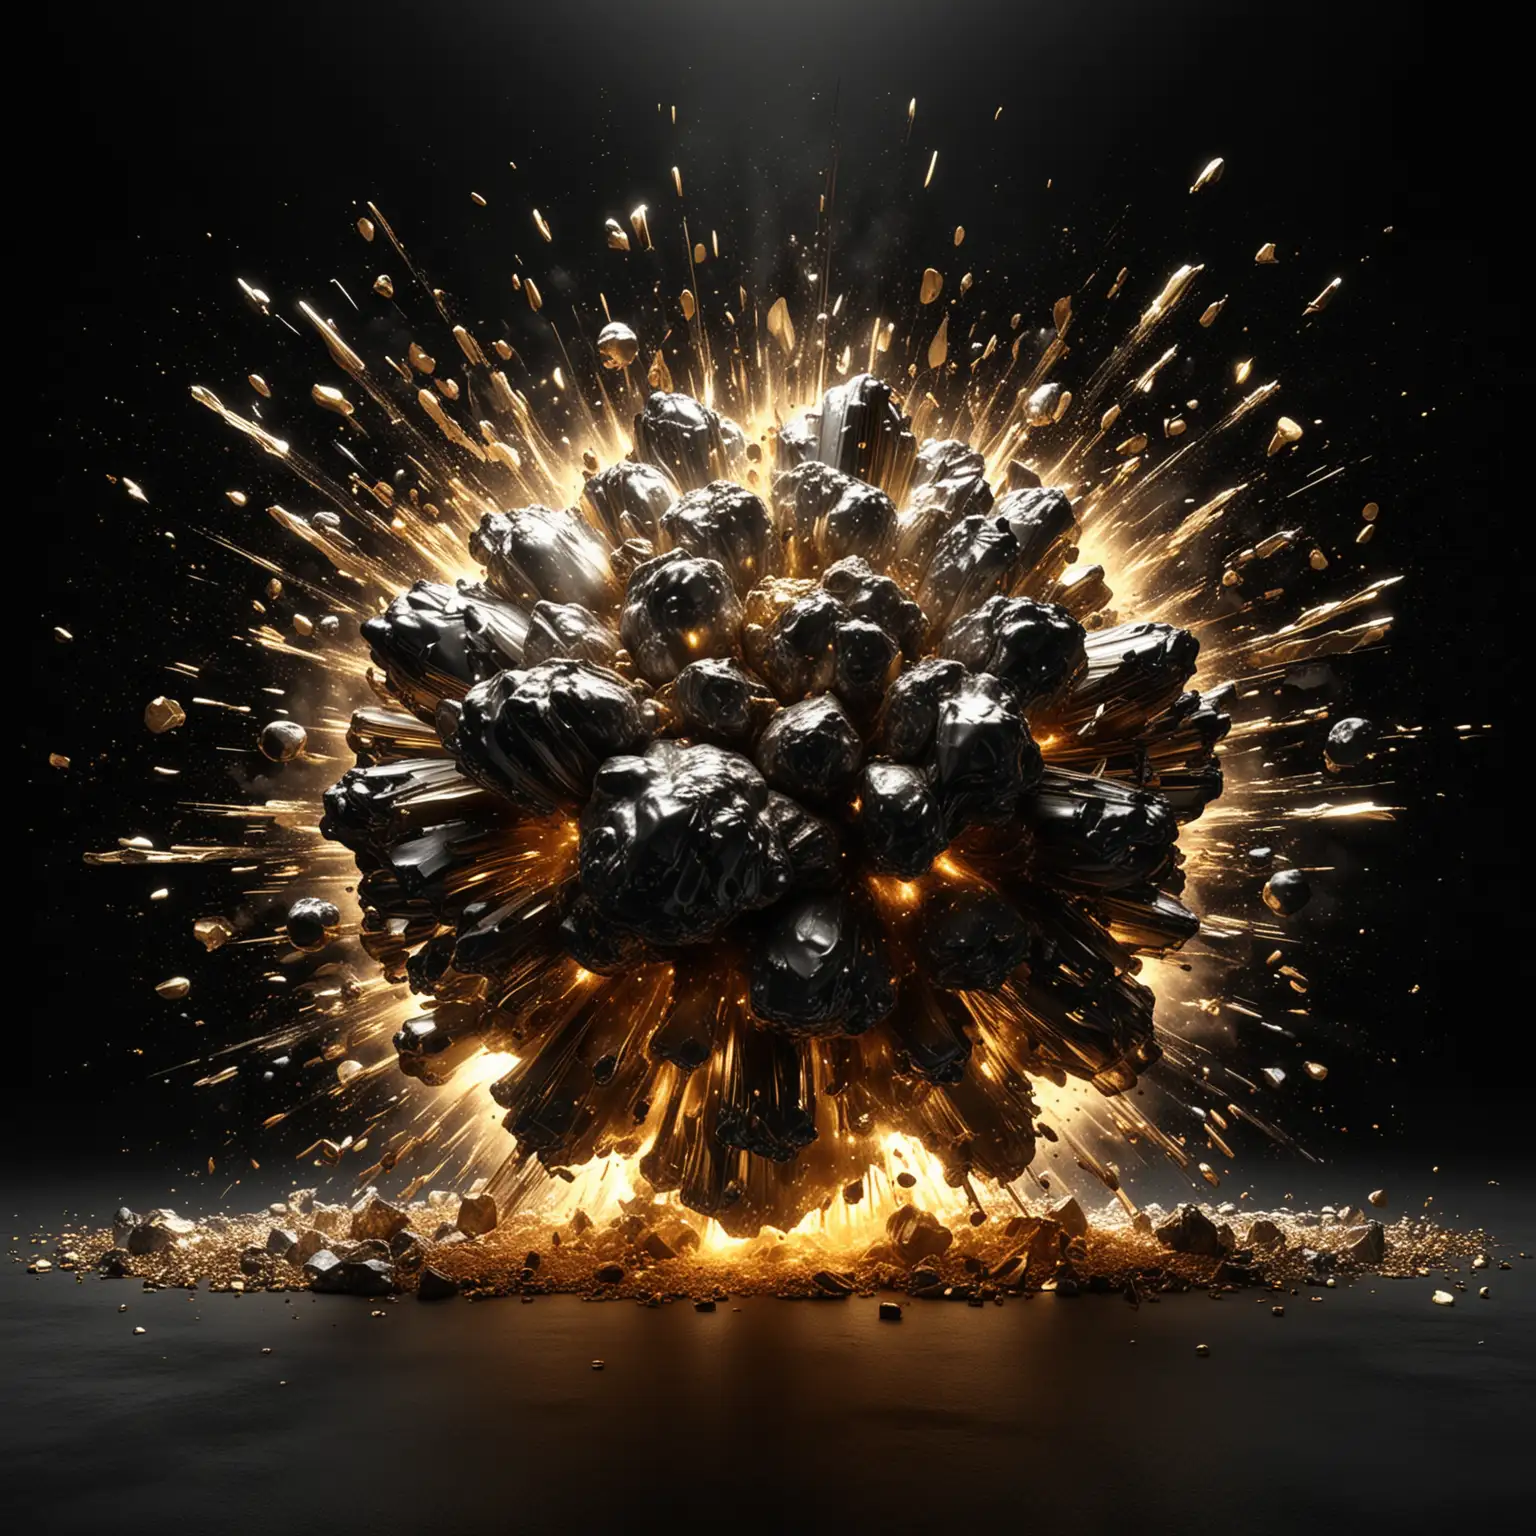 ULTRA REALISTIC high definition, BLACK BACKGROUND WITH GOLD AND CHROME EXPLOSION AND CINEMATIC LIGHTING 